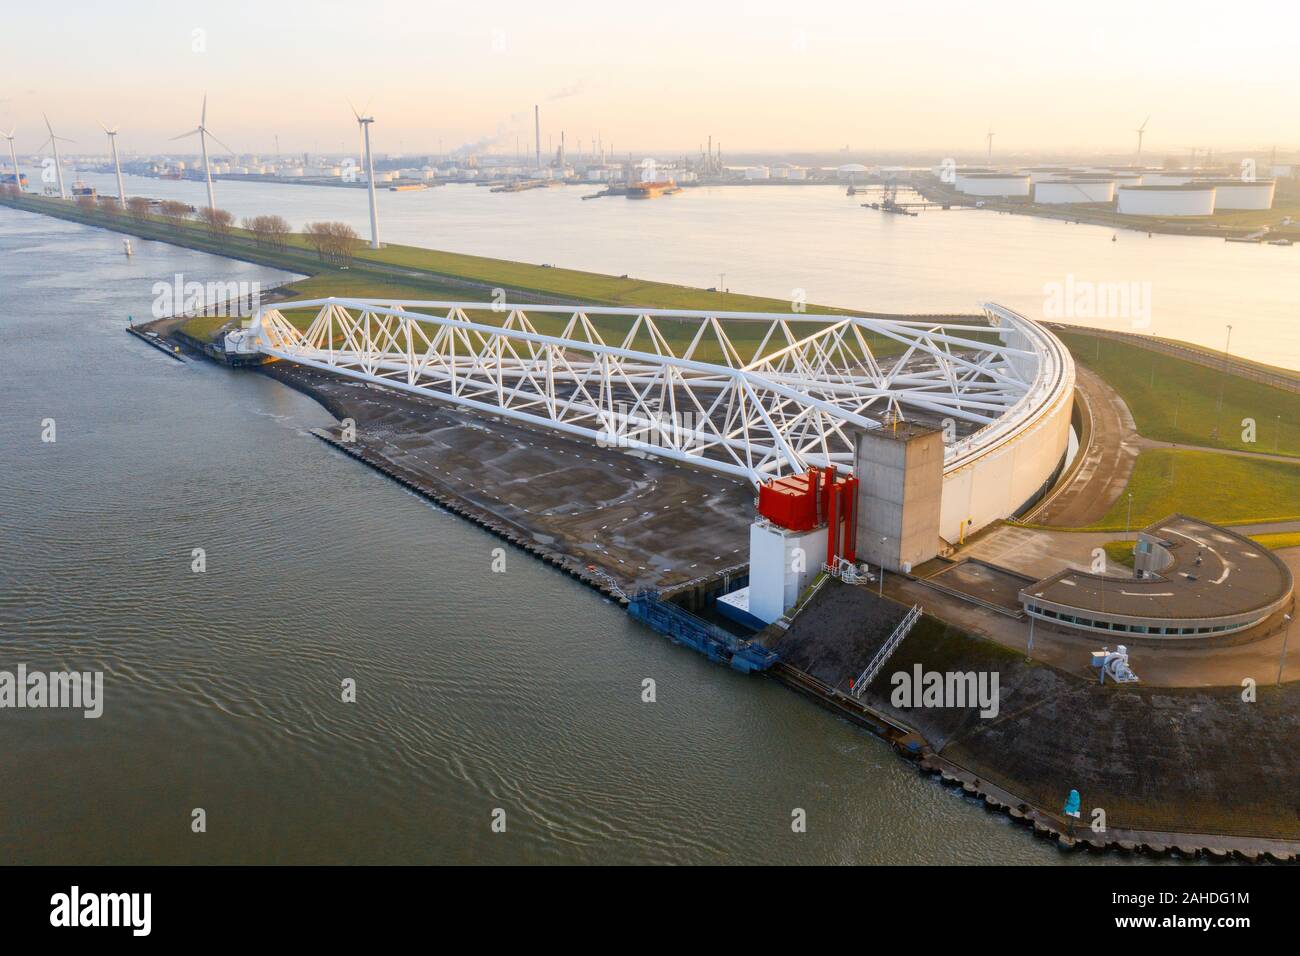 aerial view of Maeslandtkering -  Rotterdam Zuyid-holland is a impressive storm surge barrier. The Maeslantkering is a storm surge barrier on the imag Stock Photo